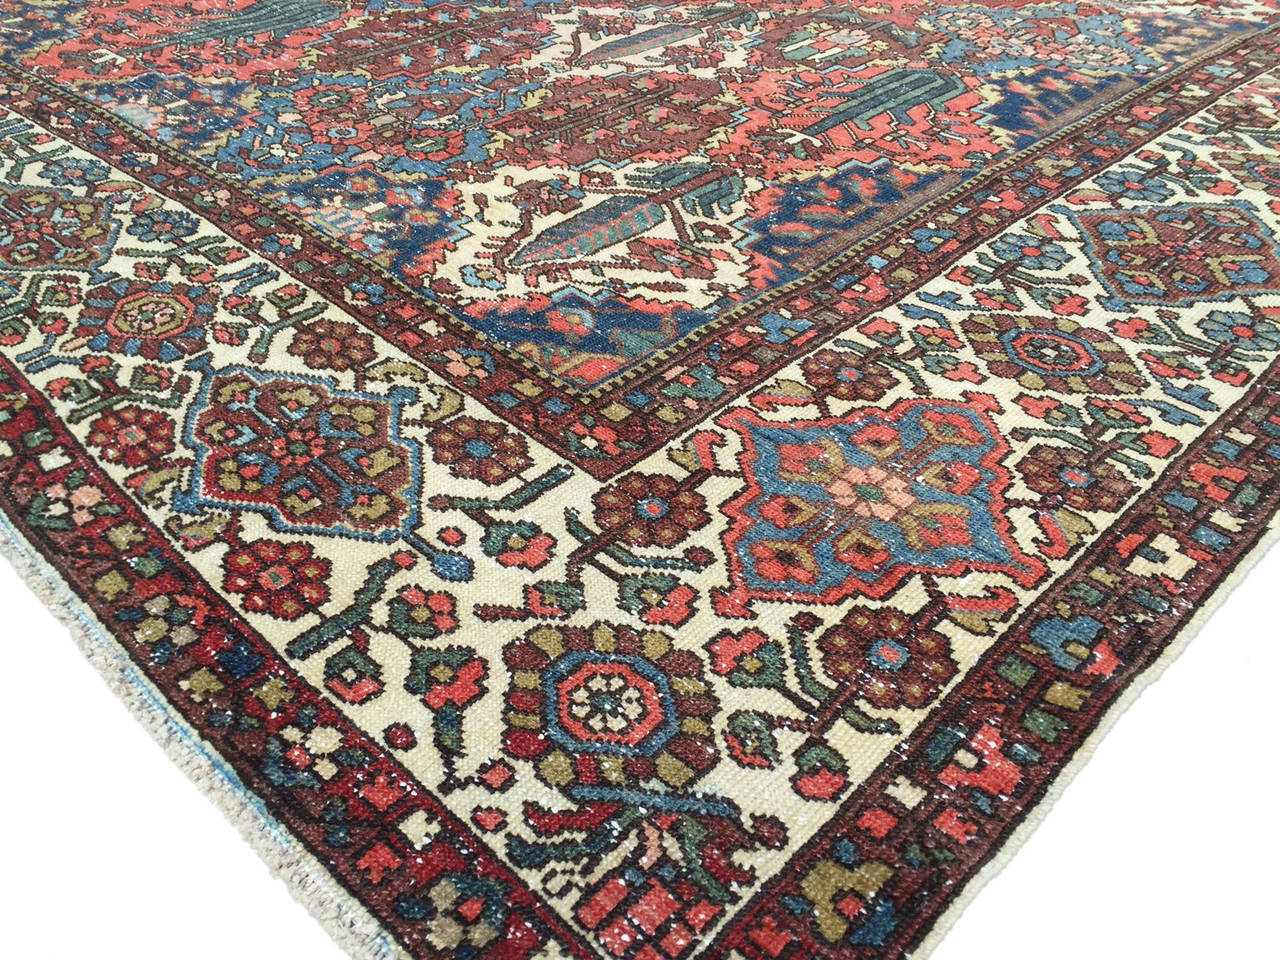 A beautiful tribal influenced antique Persian Bakhtiar featuring a beautiful all-over garden design with a magnificent border with ivory, indigo and red shades throughout.